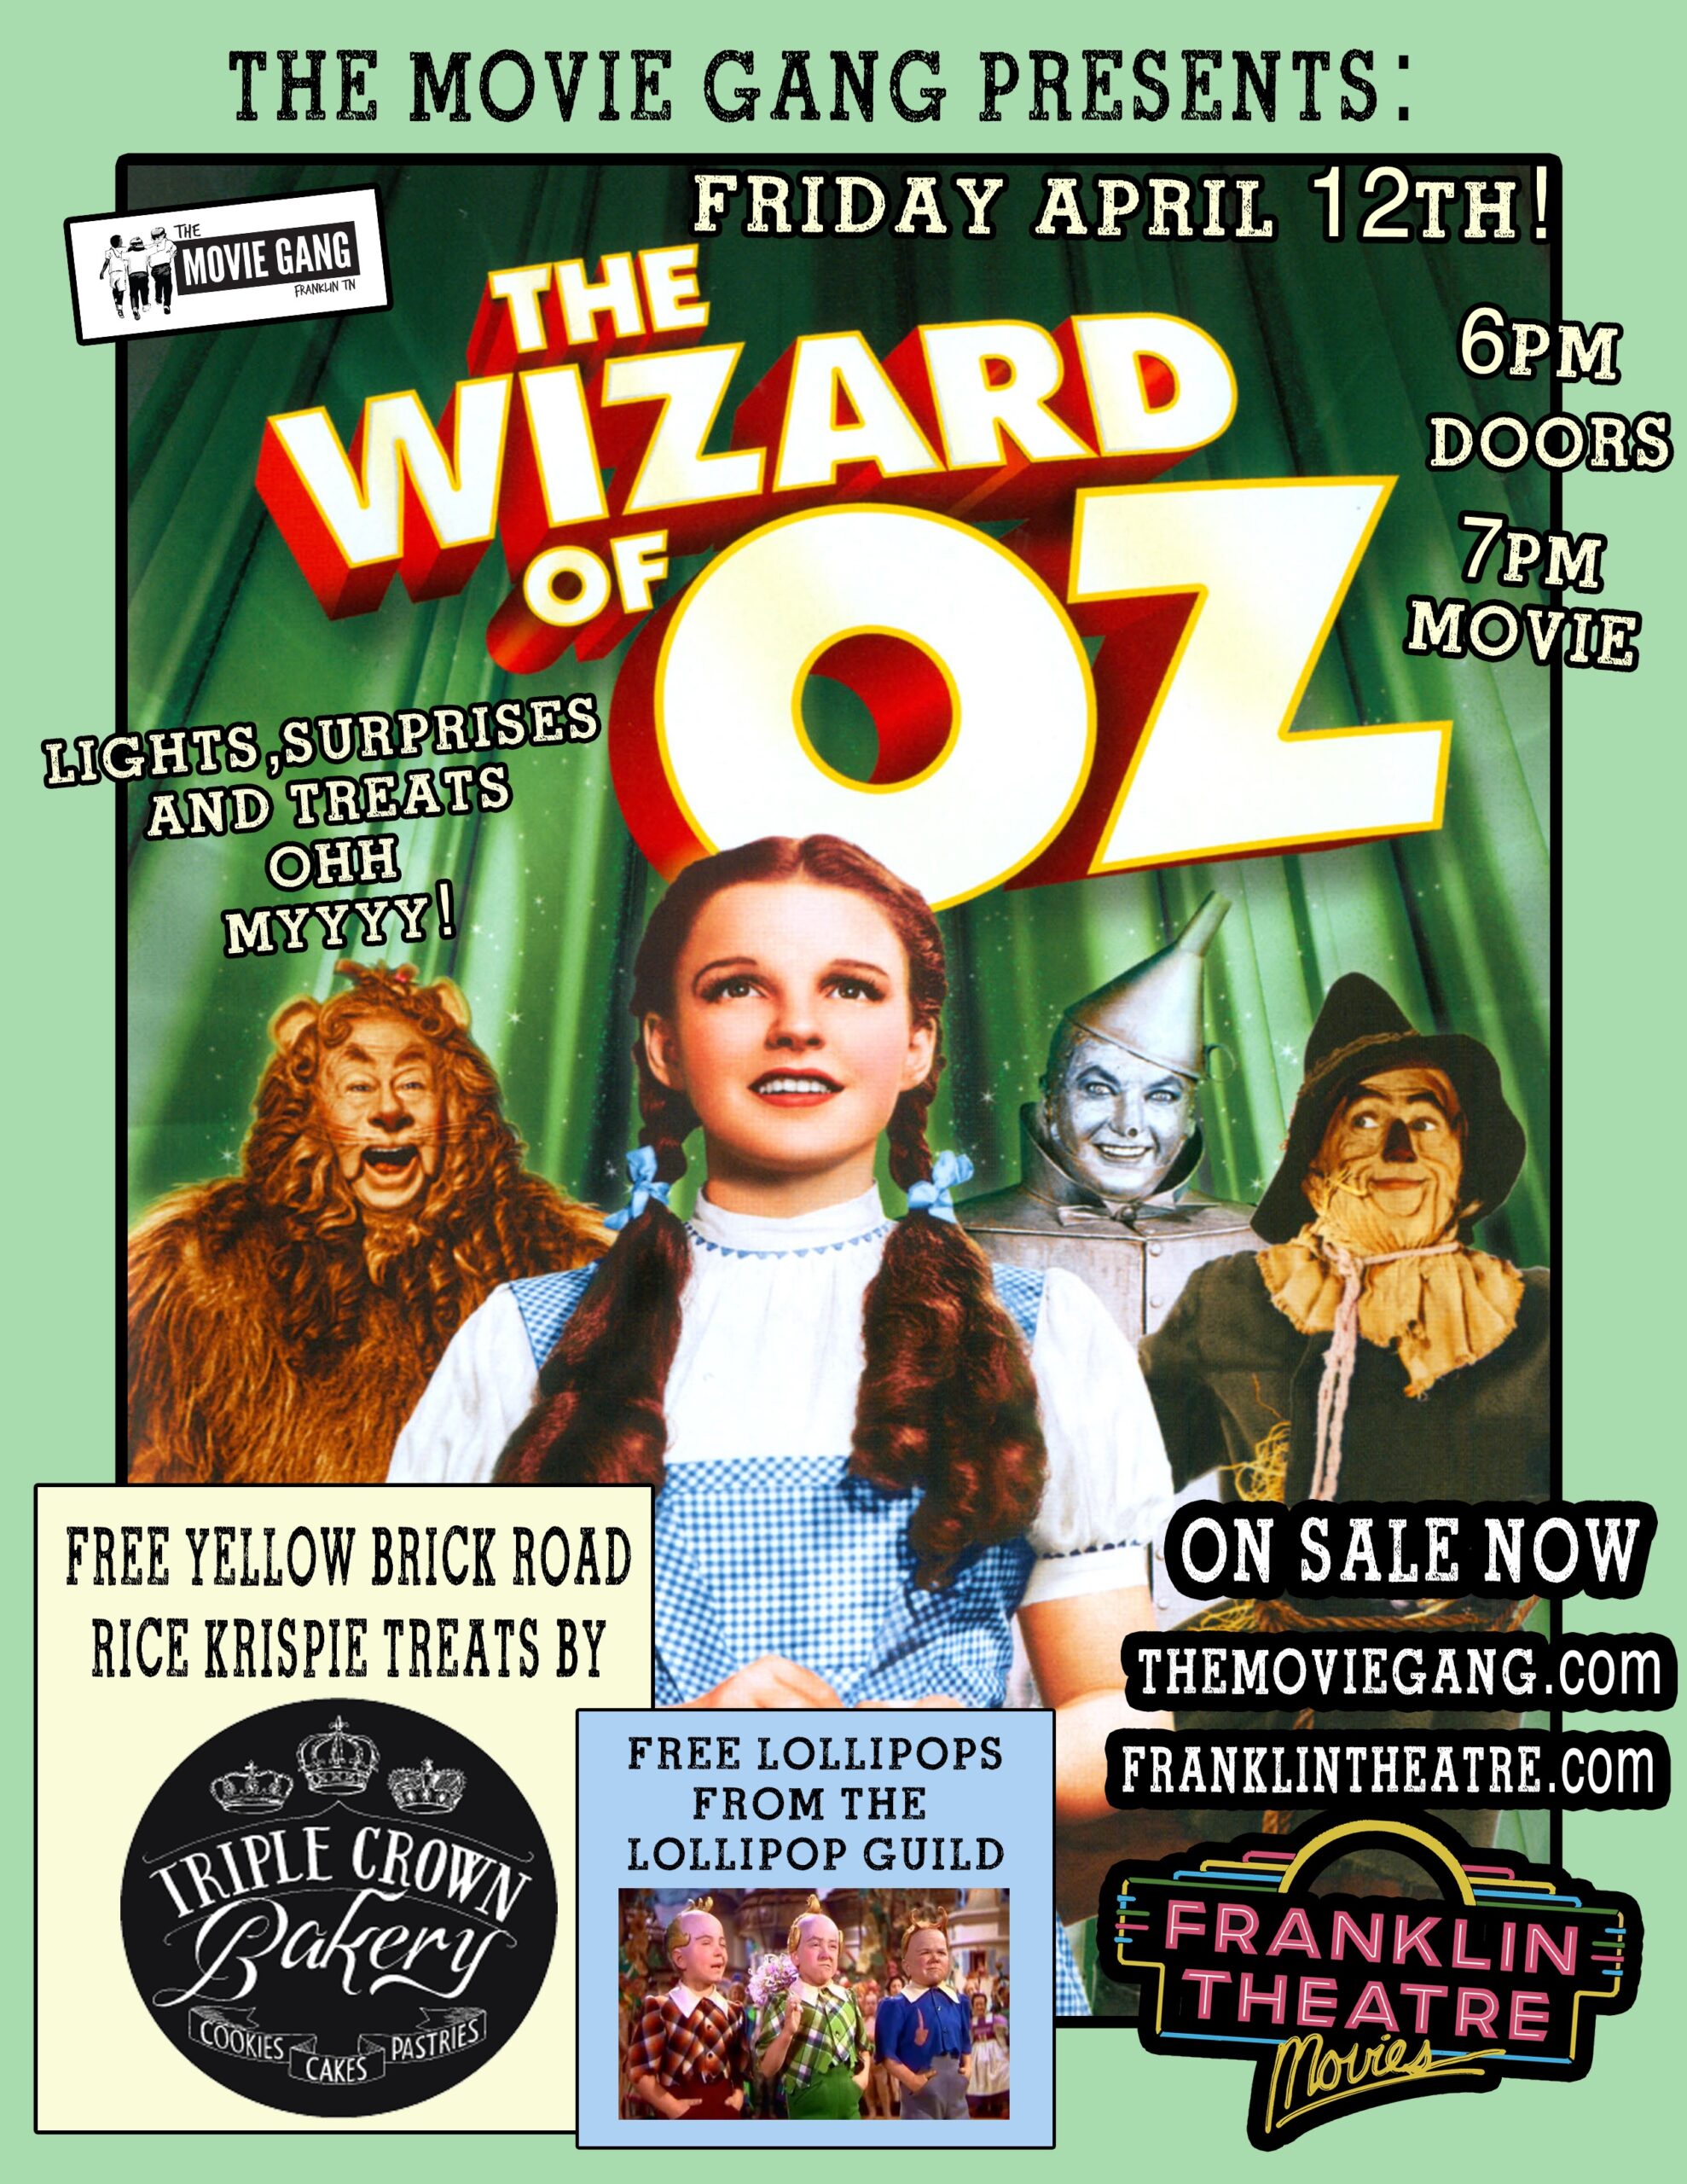 The Movie Gang Presents- The Wizard Of OZ at The Franklin Theatre in downtown Franklin.